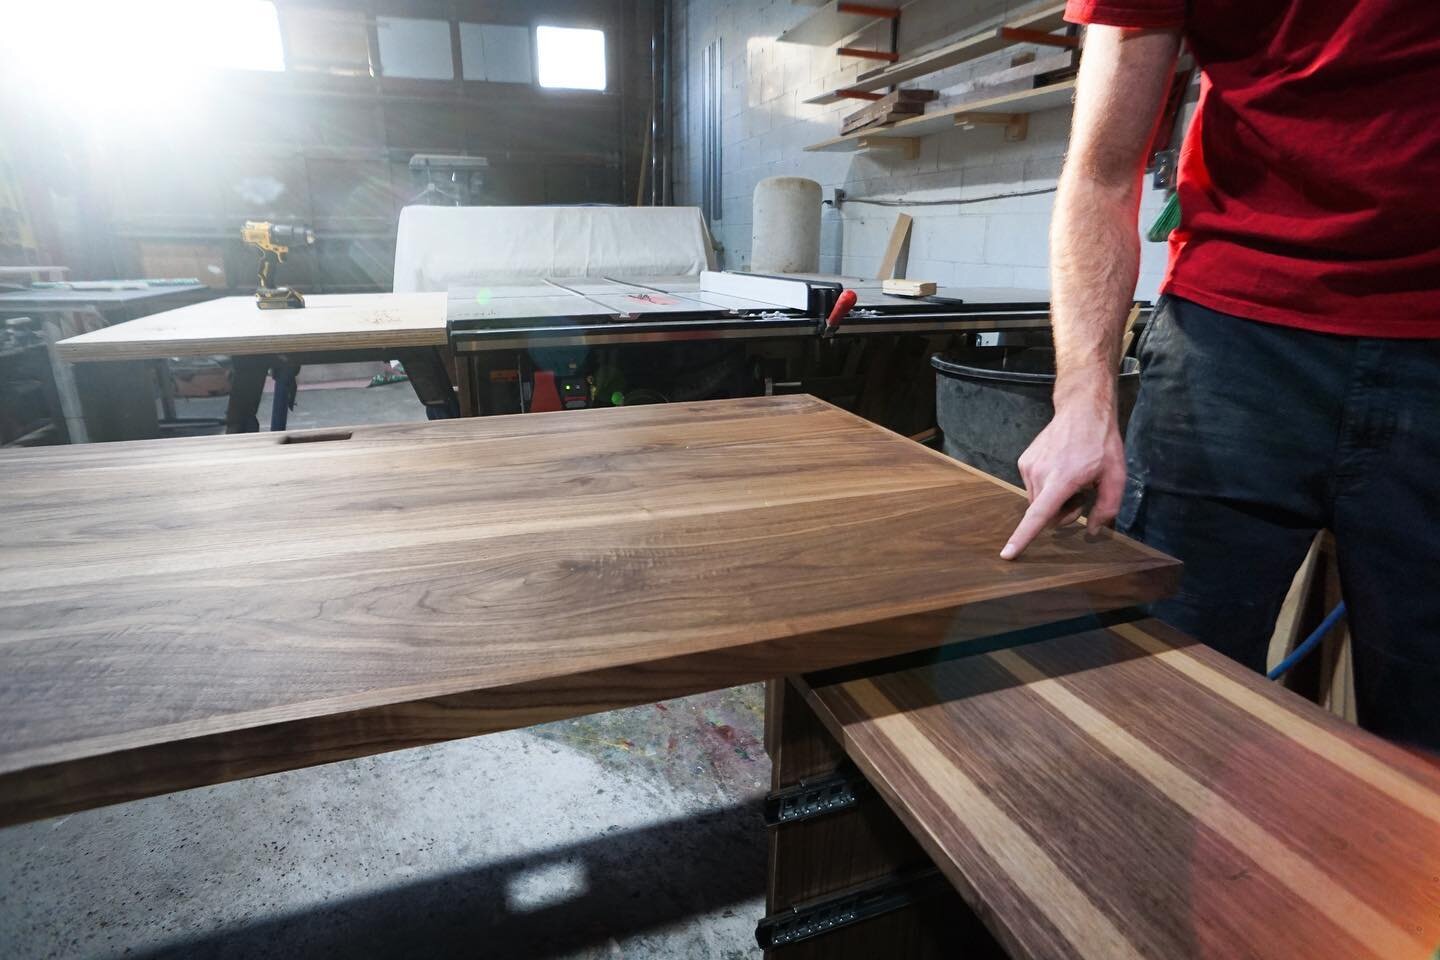 As a project nears completion, dry fitting is one of the most vital parts of any custom build &mdash; don&rsquo;t skip it. Check, recheck, and then do it all over again. 

#woodchipwerks #customfurniture #madeintoronto #madebyhand #interiordesign #to